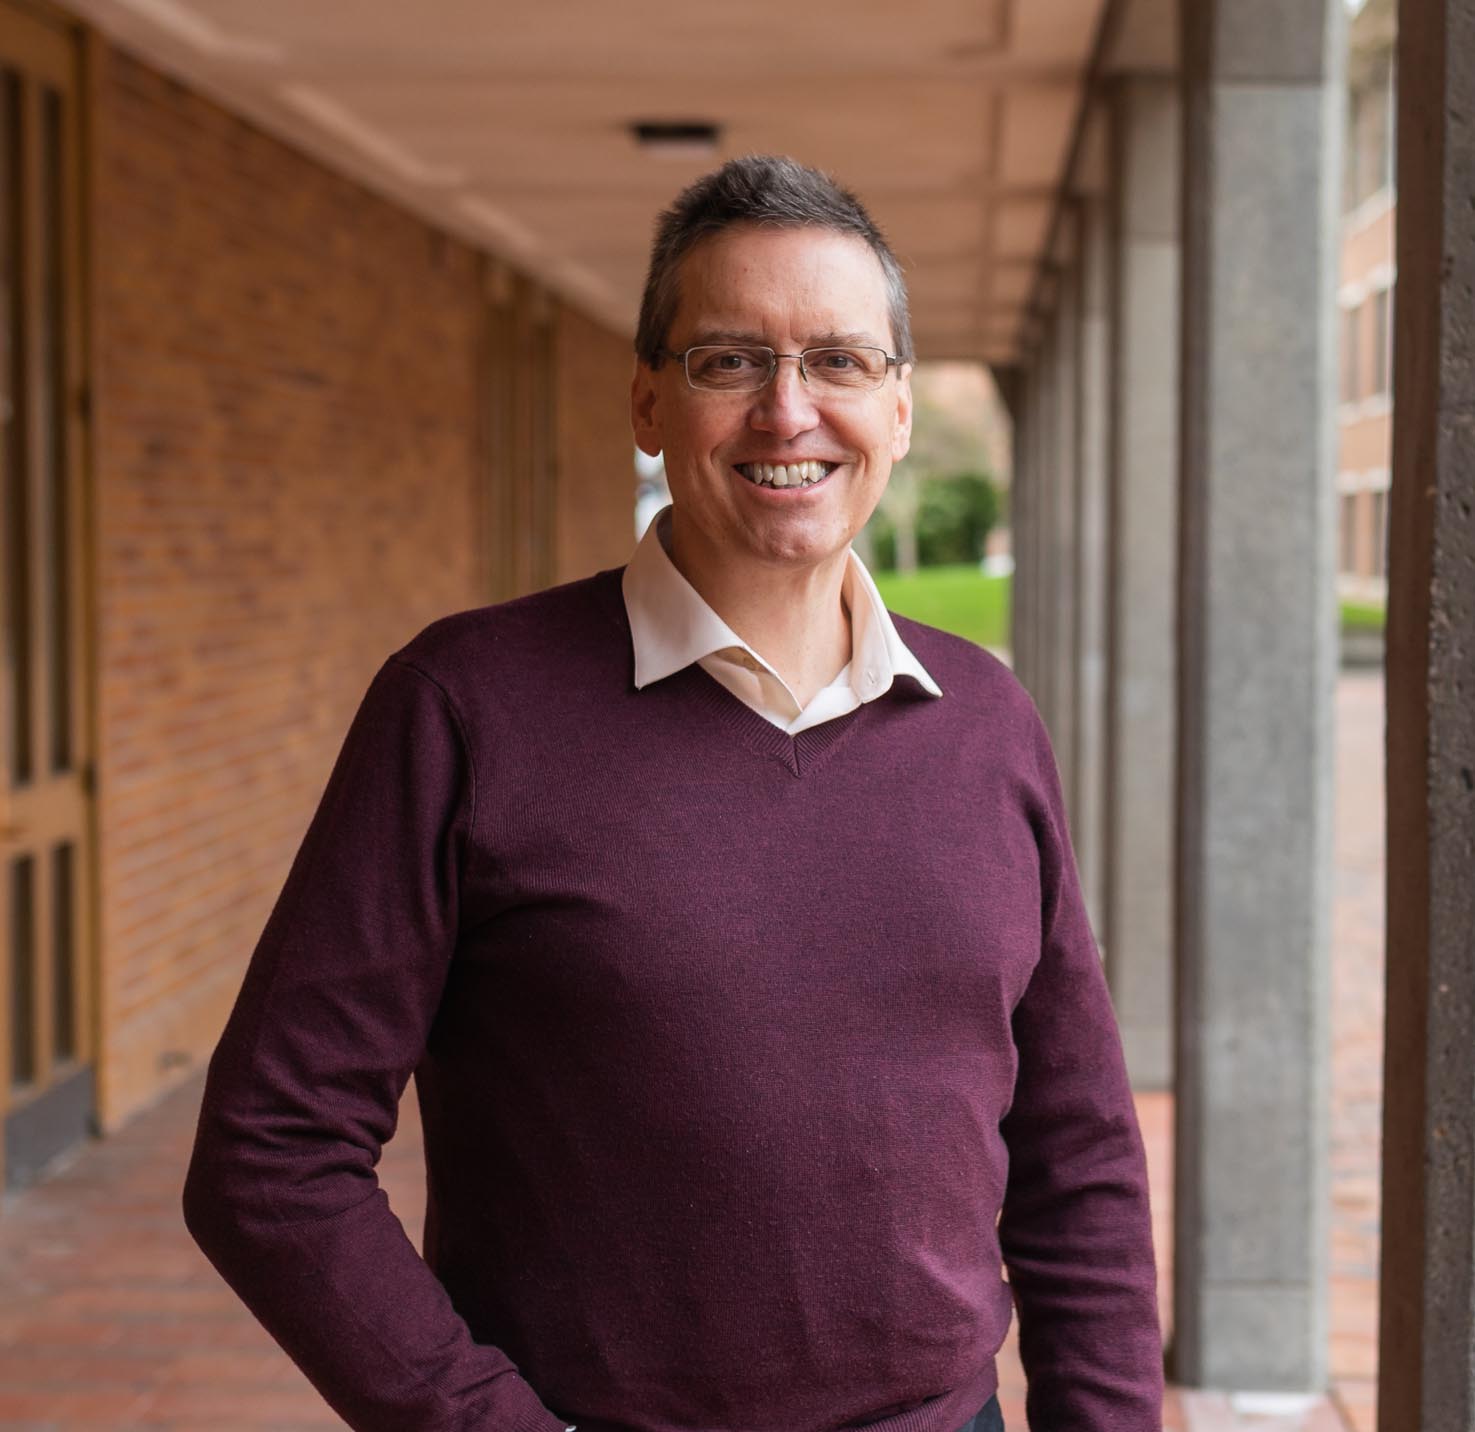 Brad Johnson standing next to Miller Hall, wearing a maroon sweater over a cream colored shirt